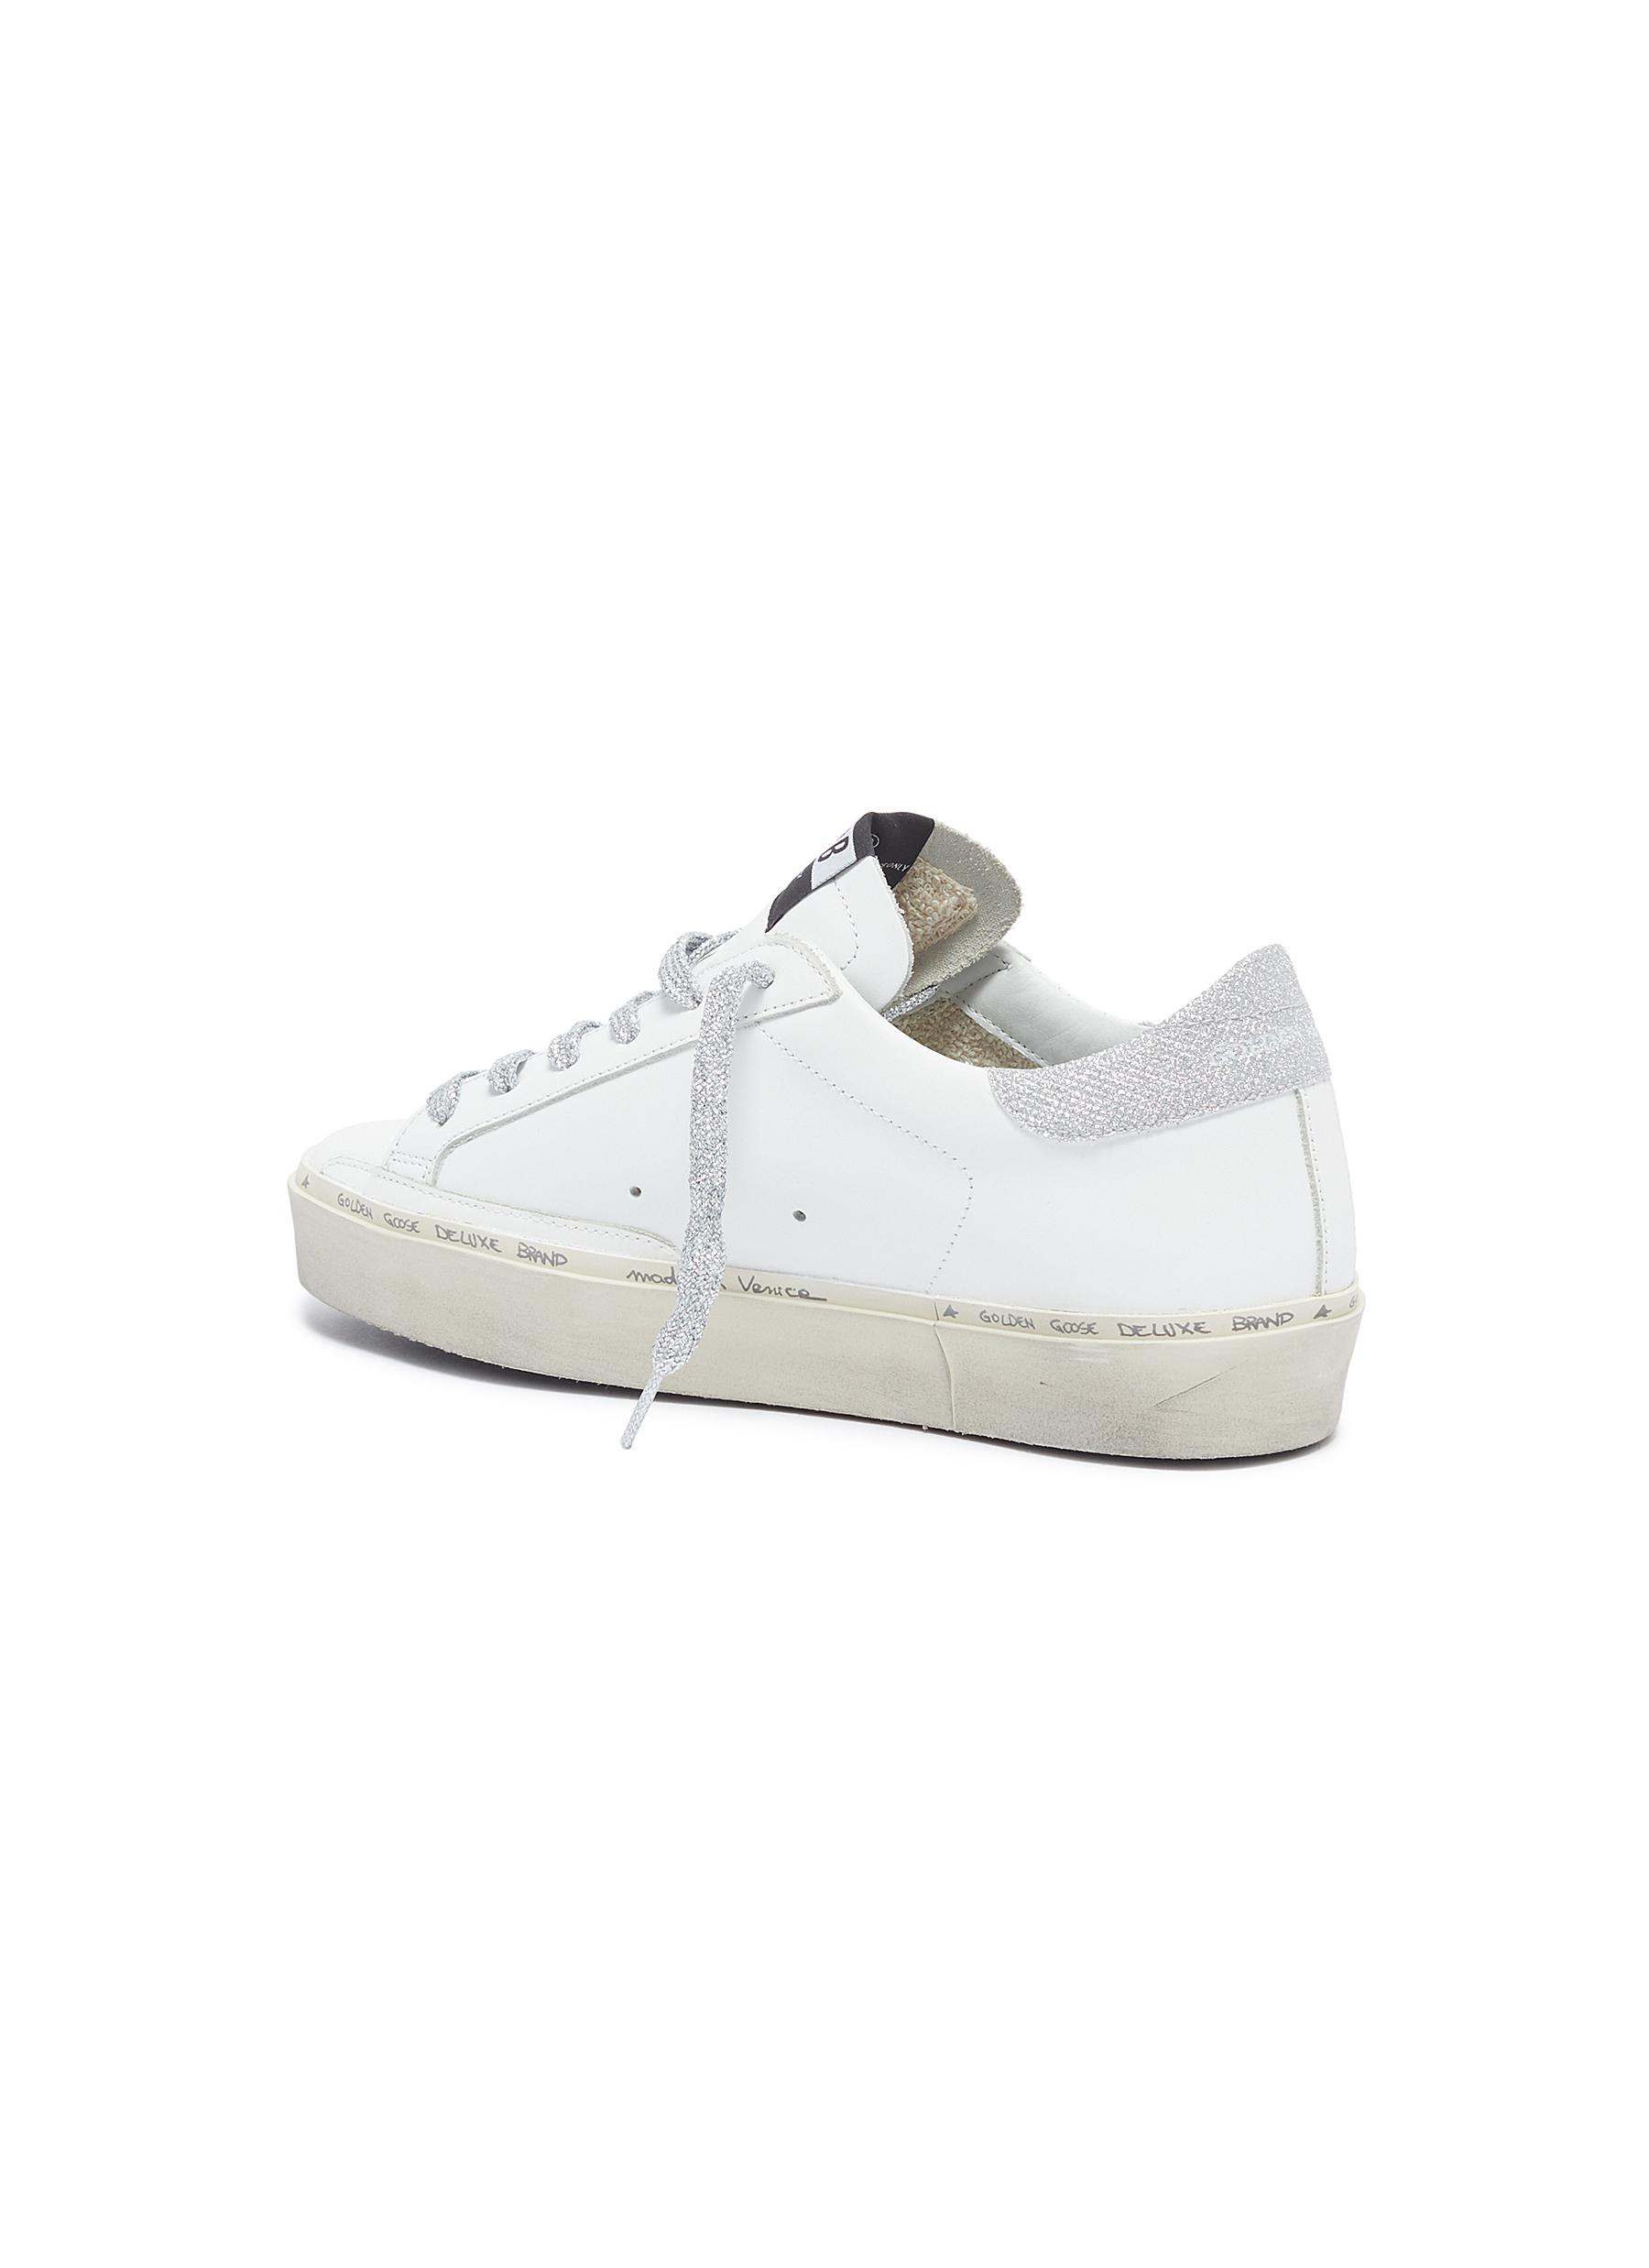 Golden Goose 'hi Star' Leopard Star Patch Glitter Tab Leather Sneakers ...